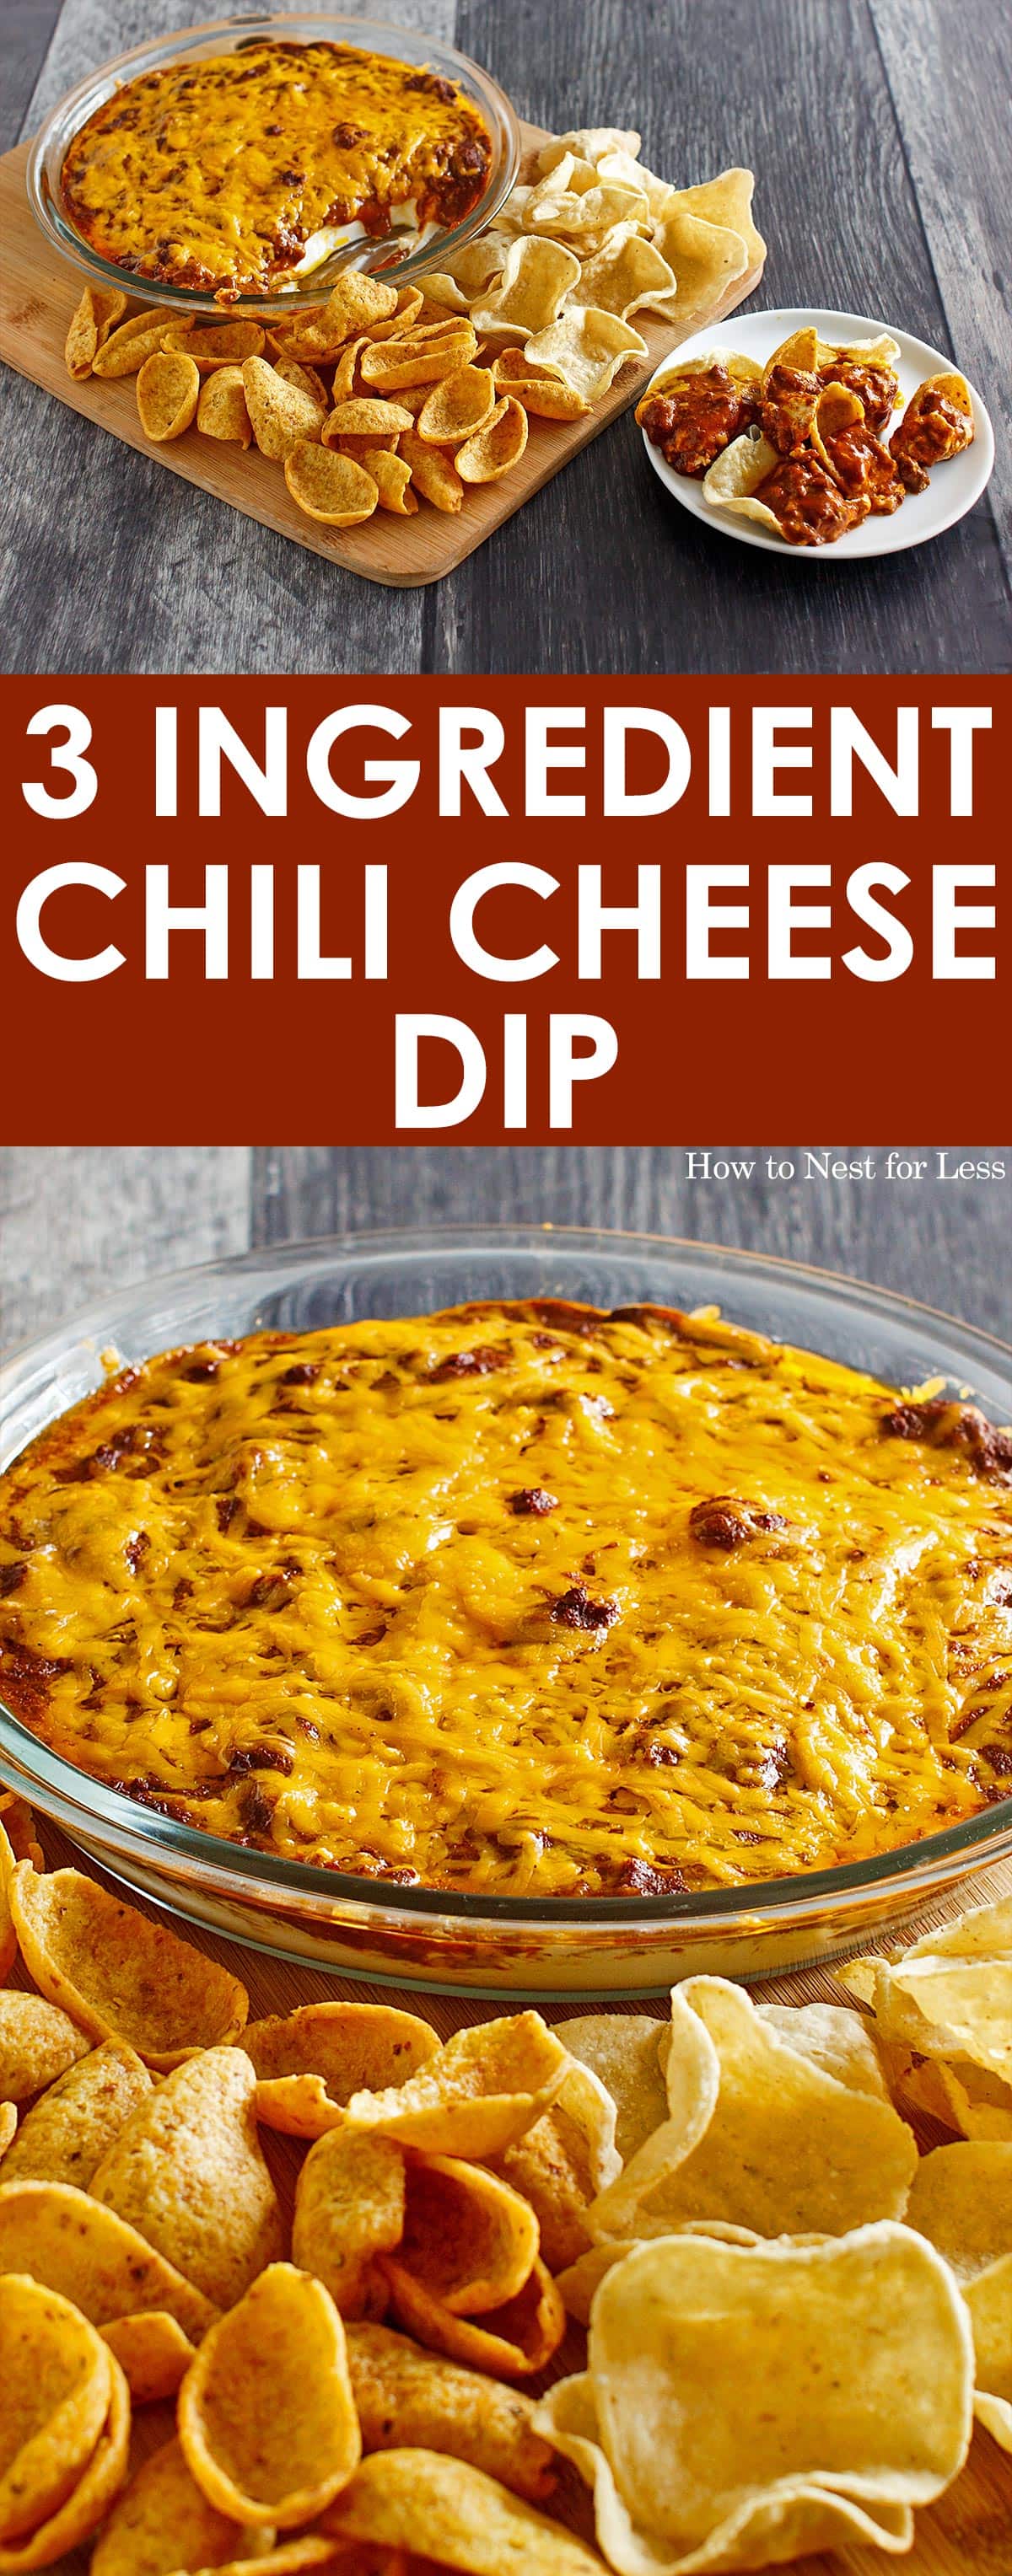 3 Ingredient Chili Cheese Dip - How To Nest For Less